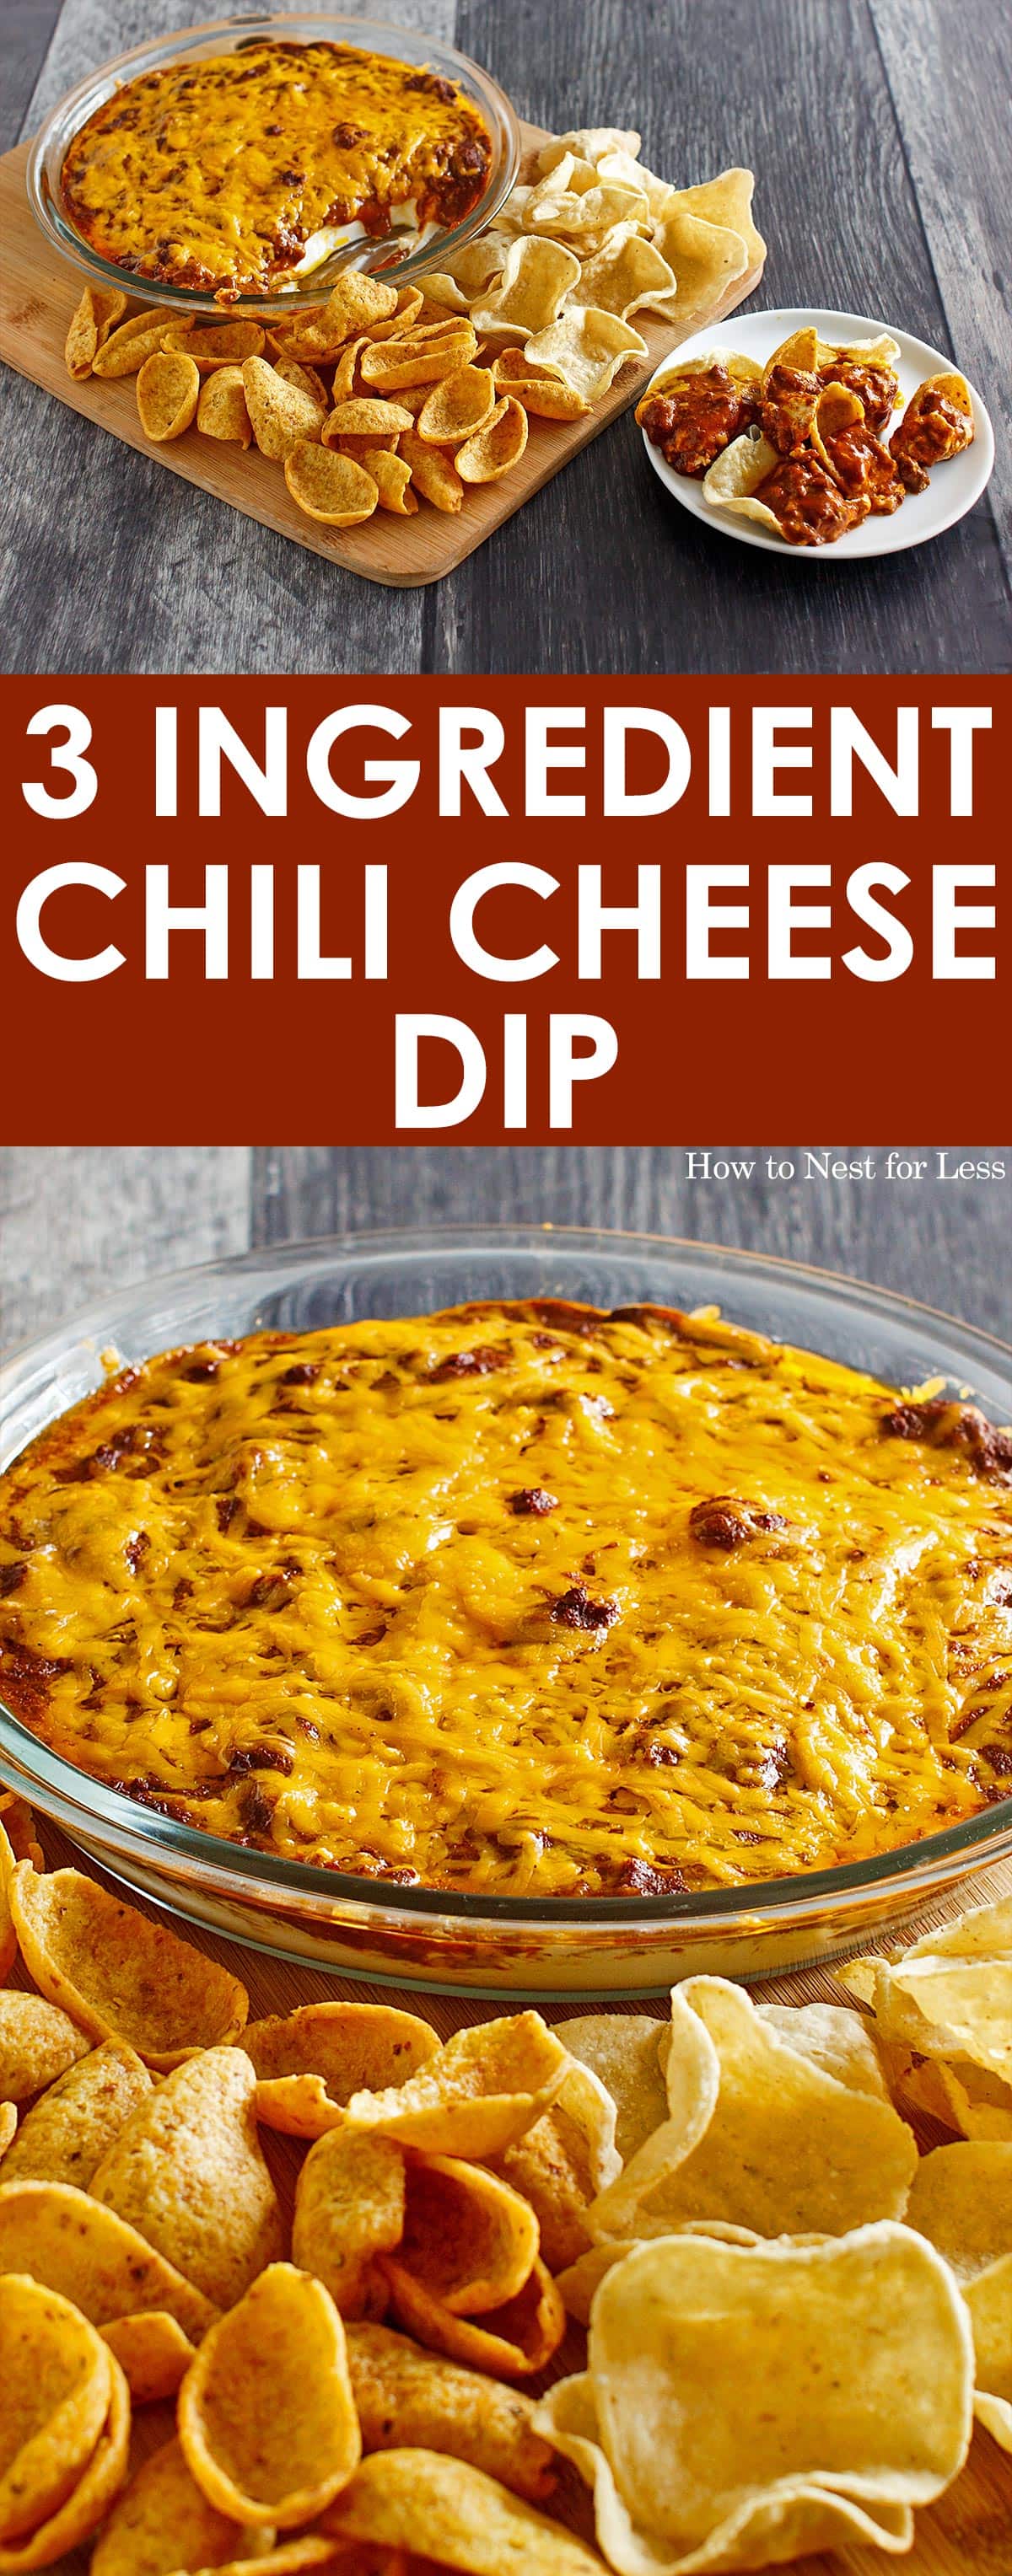 3 Ingredient Chili Cheese Dip - How To Nest For Less